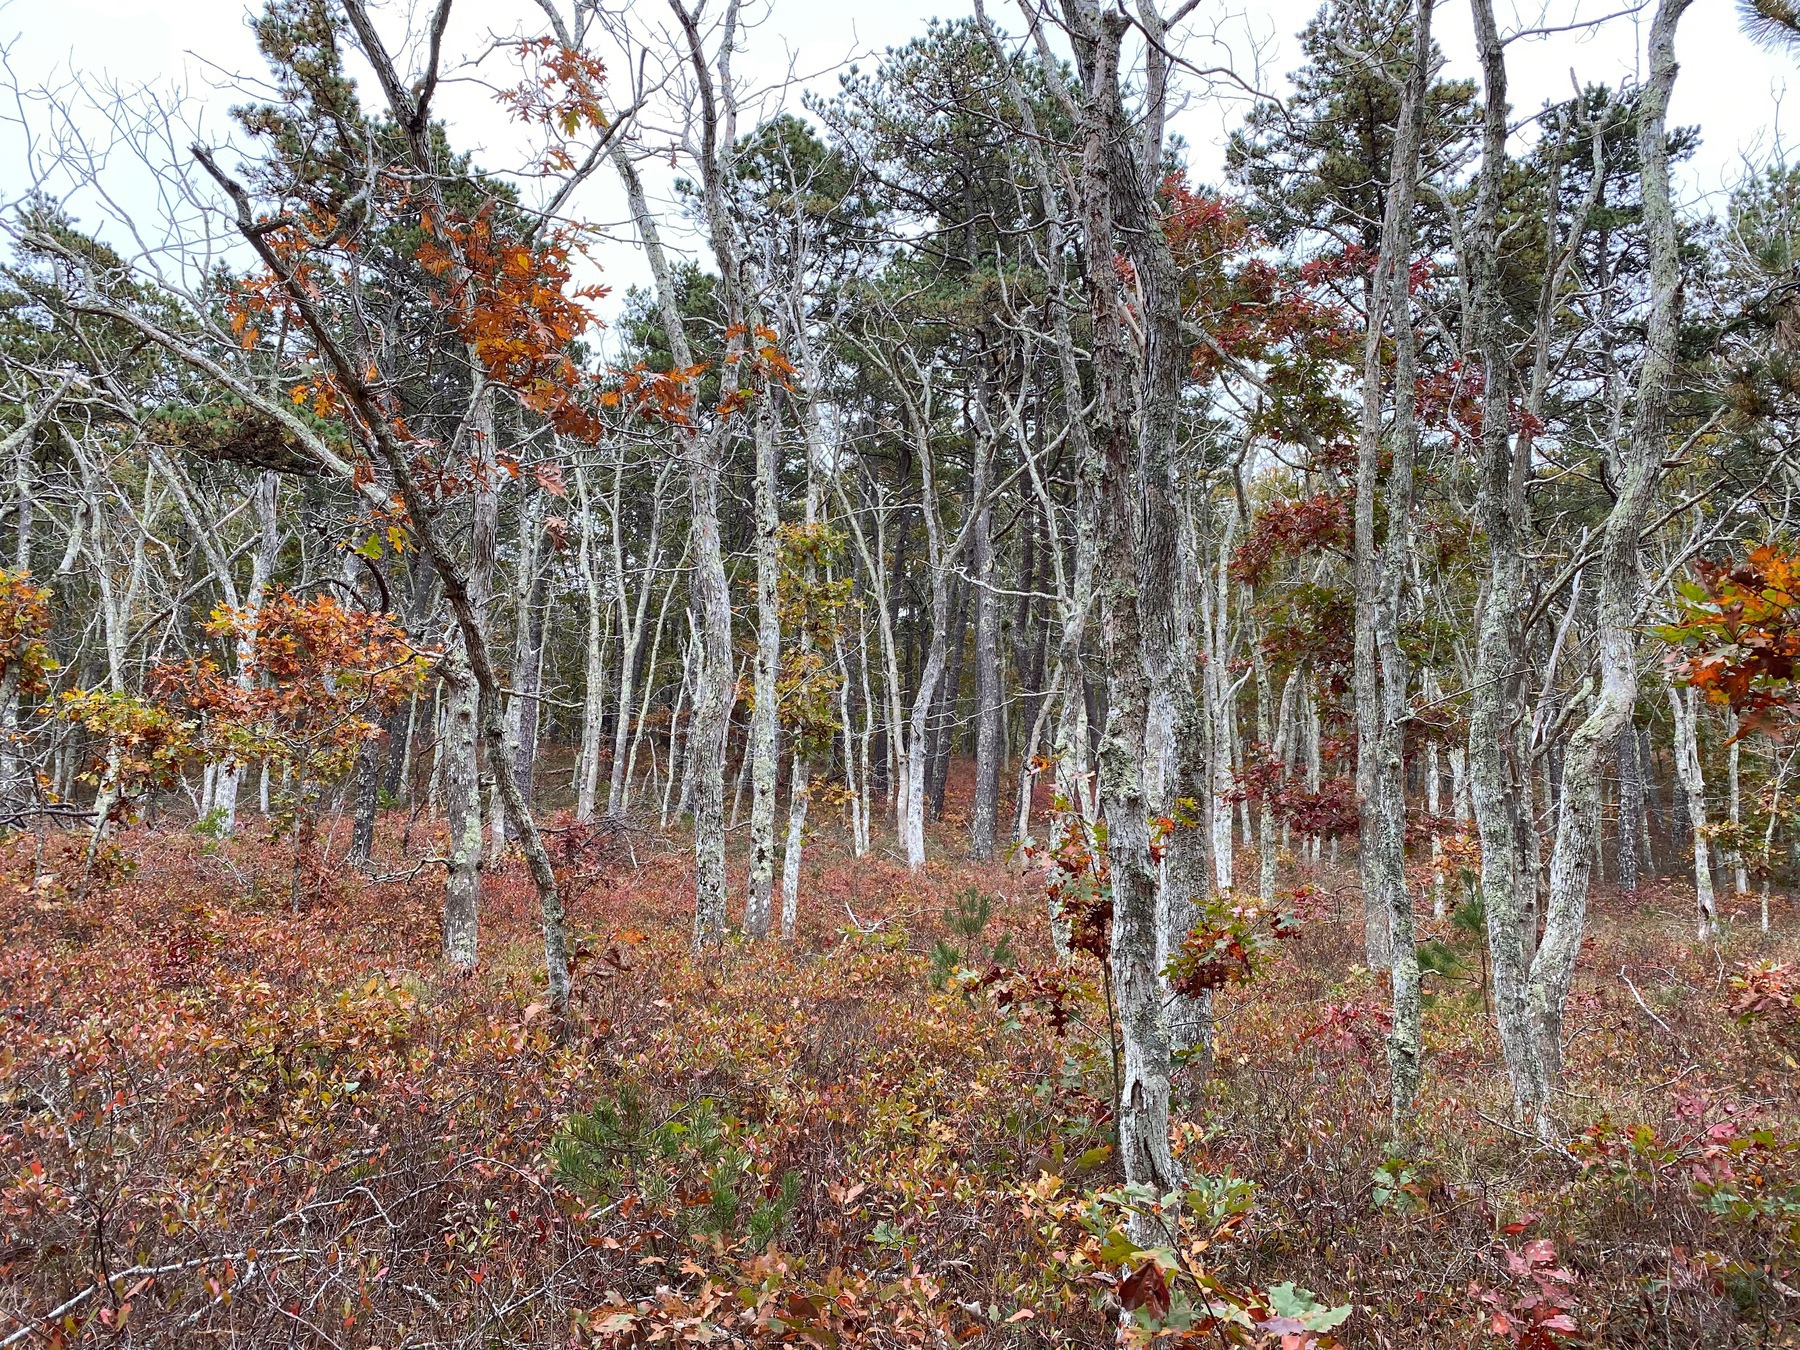 View of an autumn forest with bare branched aspen trunks in the foreground and pine trees in the background.